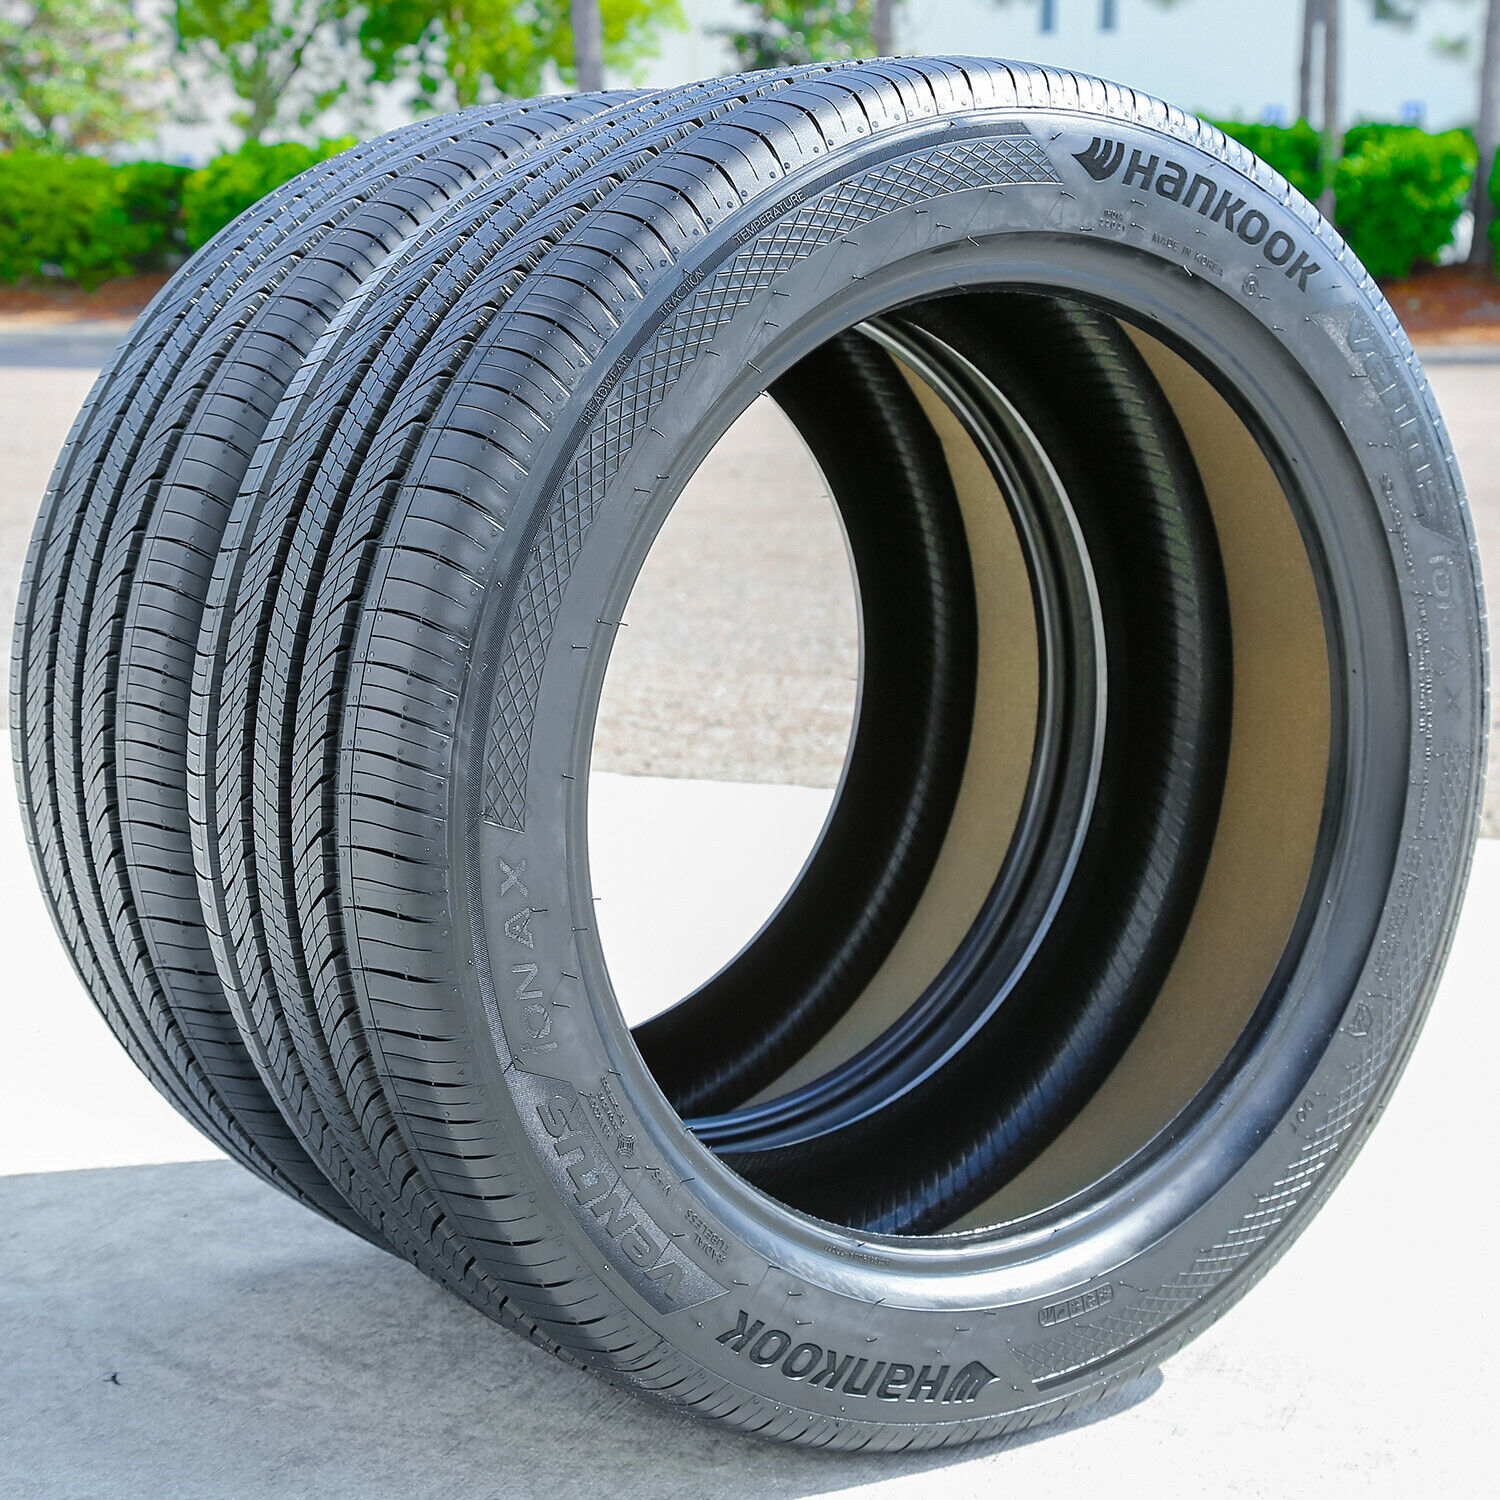 2 Tires Hankook Ventus iON AX 245/45R20 103Y XL AS A/S High Performance